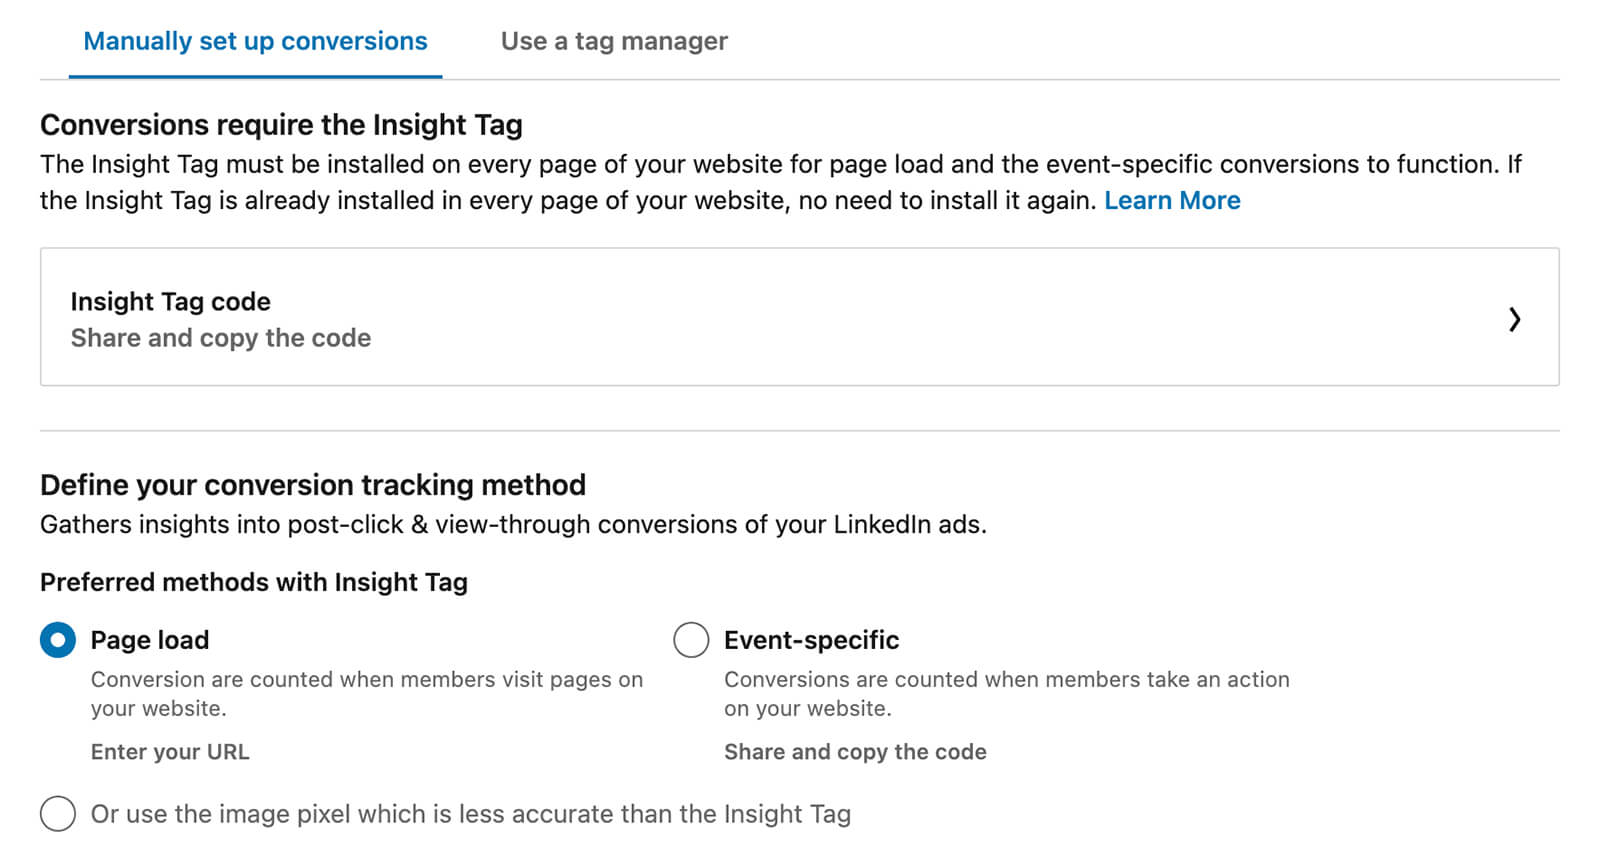 how-to-track-conversions-with-linkedin-document-ads-create-new-conversion-link-on-page-or-website-conversions-quote-requests-purchases-ad-clicks-phone-calls-example-9